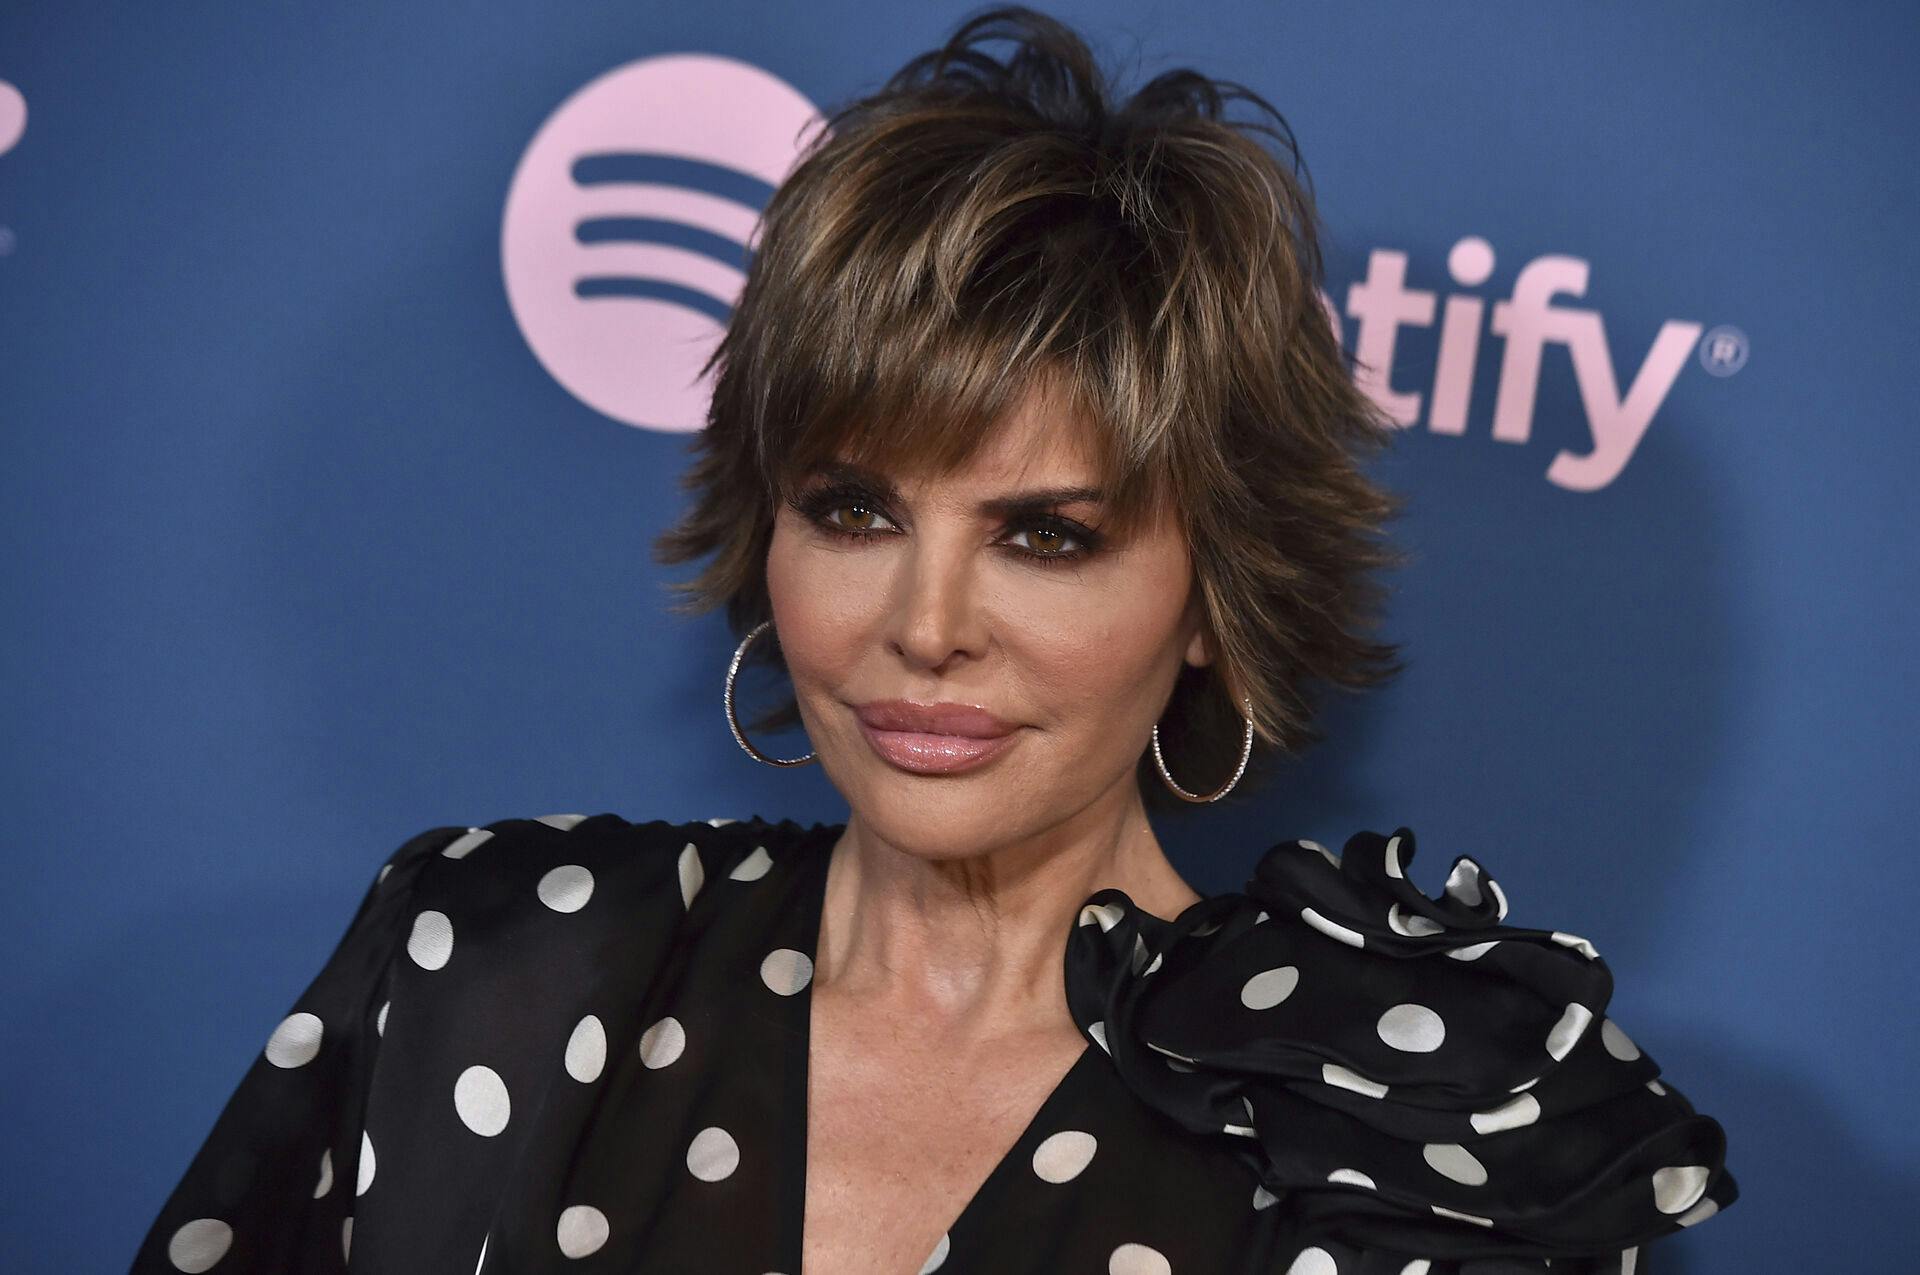 Lisa Rinna arrives at The Hollywood Reporter's Women in Entertainment Gala on Wednesday, Dec. 7, 2022, at Fairmont Century Plaza in Los Angeles. (Photo by Jordan Strauss/Invision/AP)